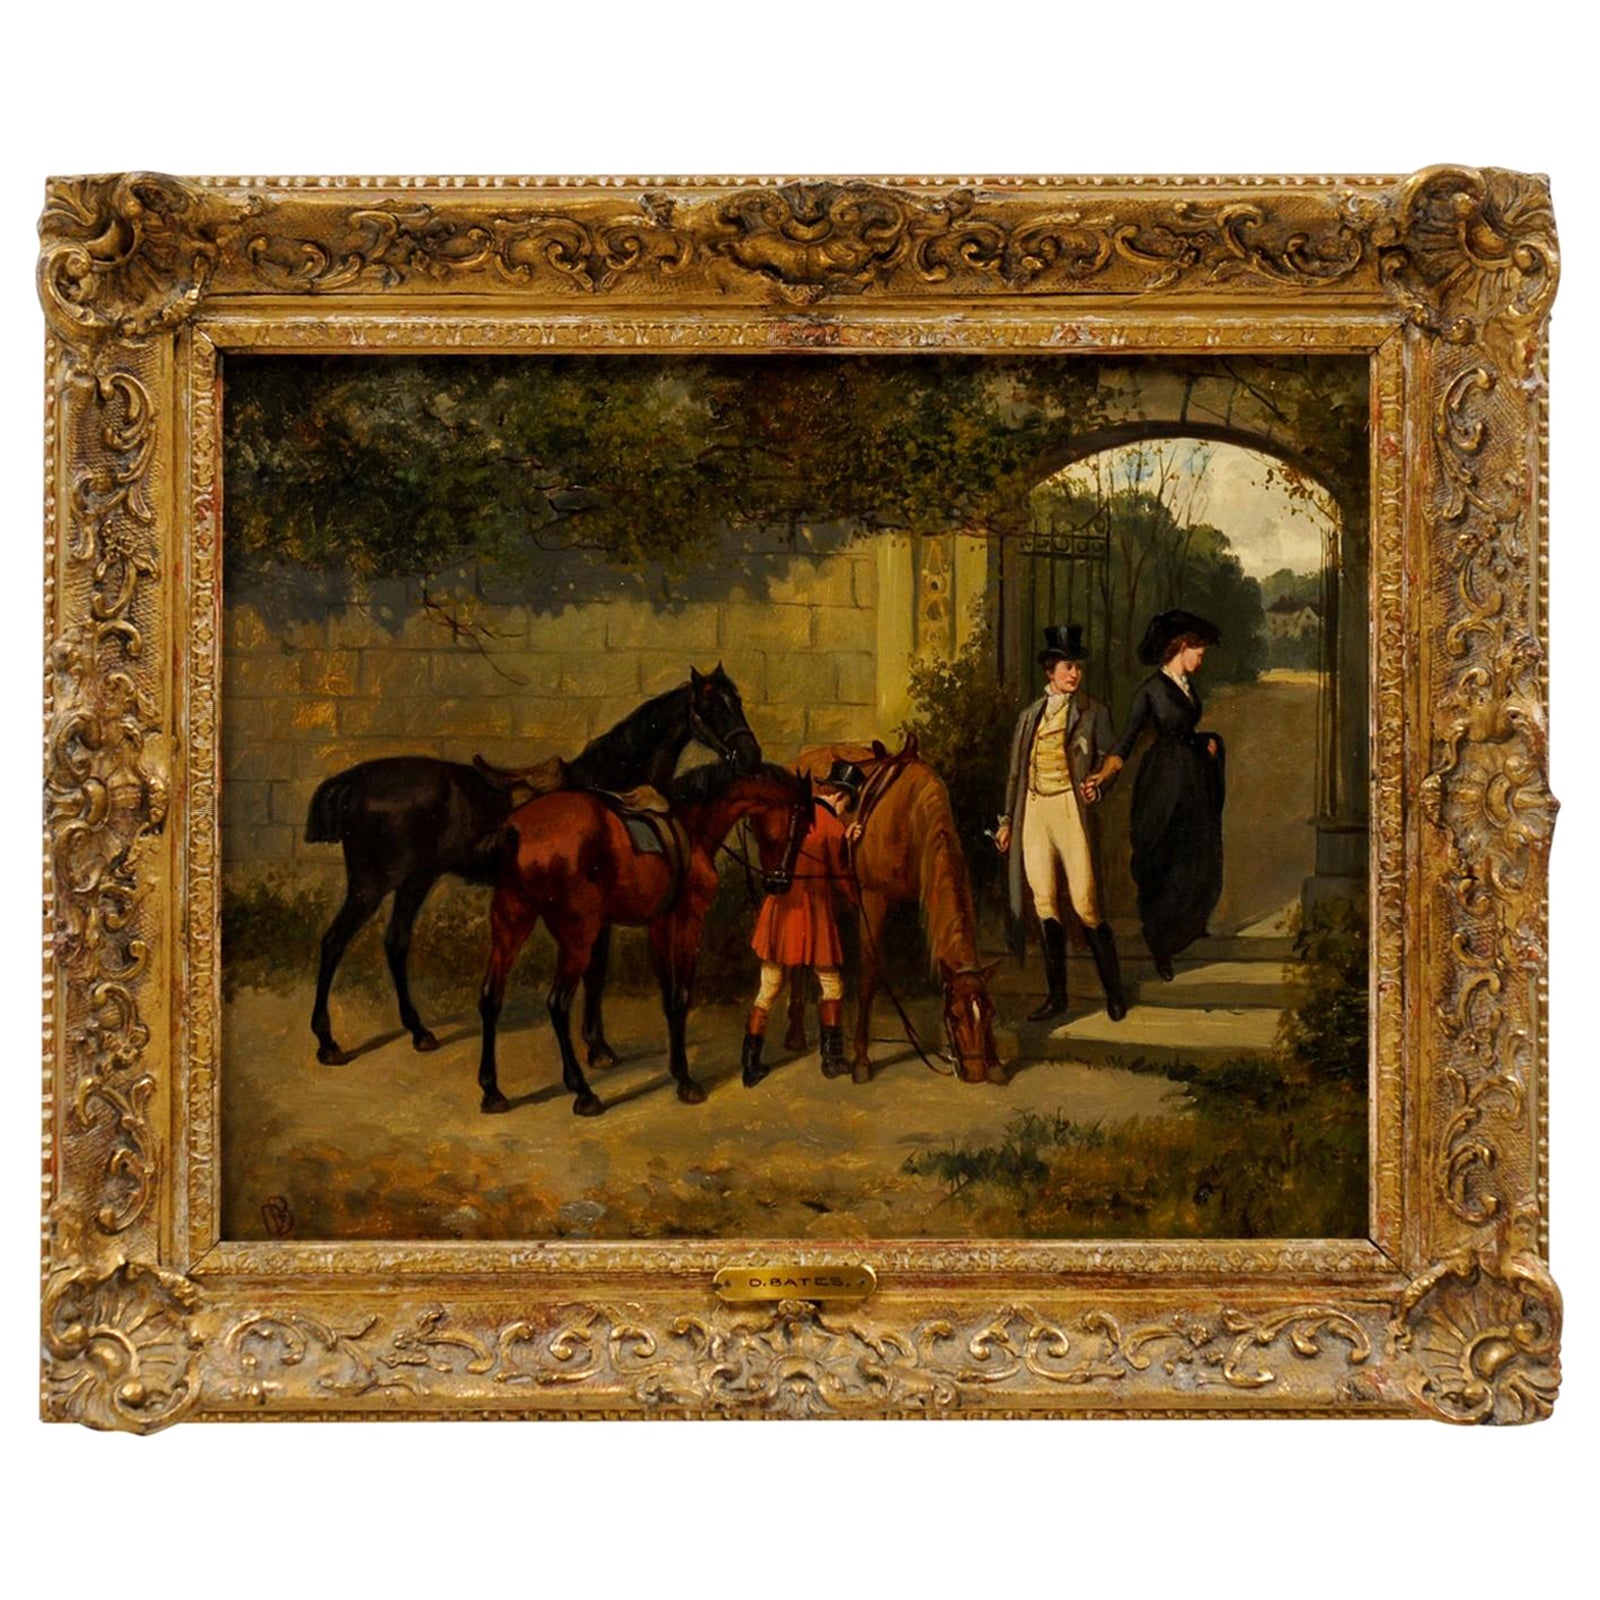 Gilt Framed Oil on Canvas Painting Featuring Horses with Man & Woman, Signed